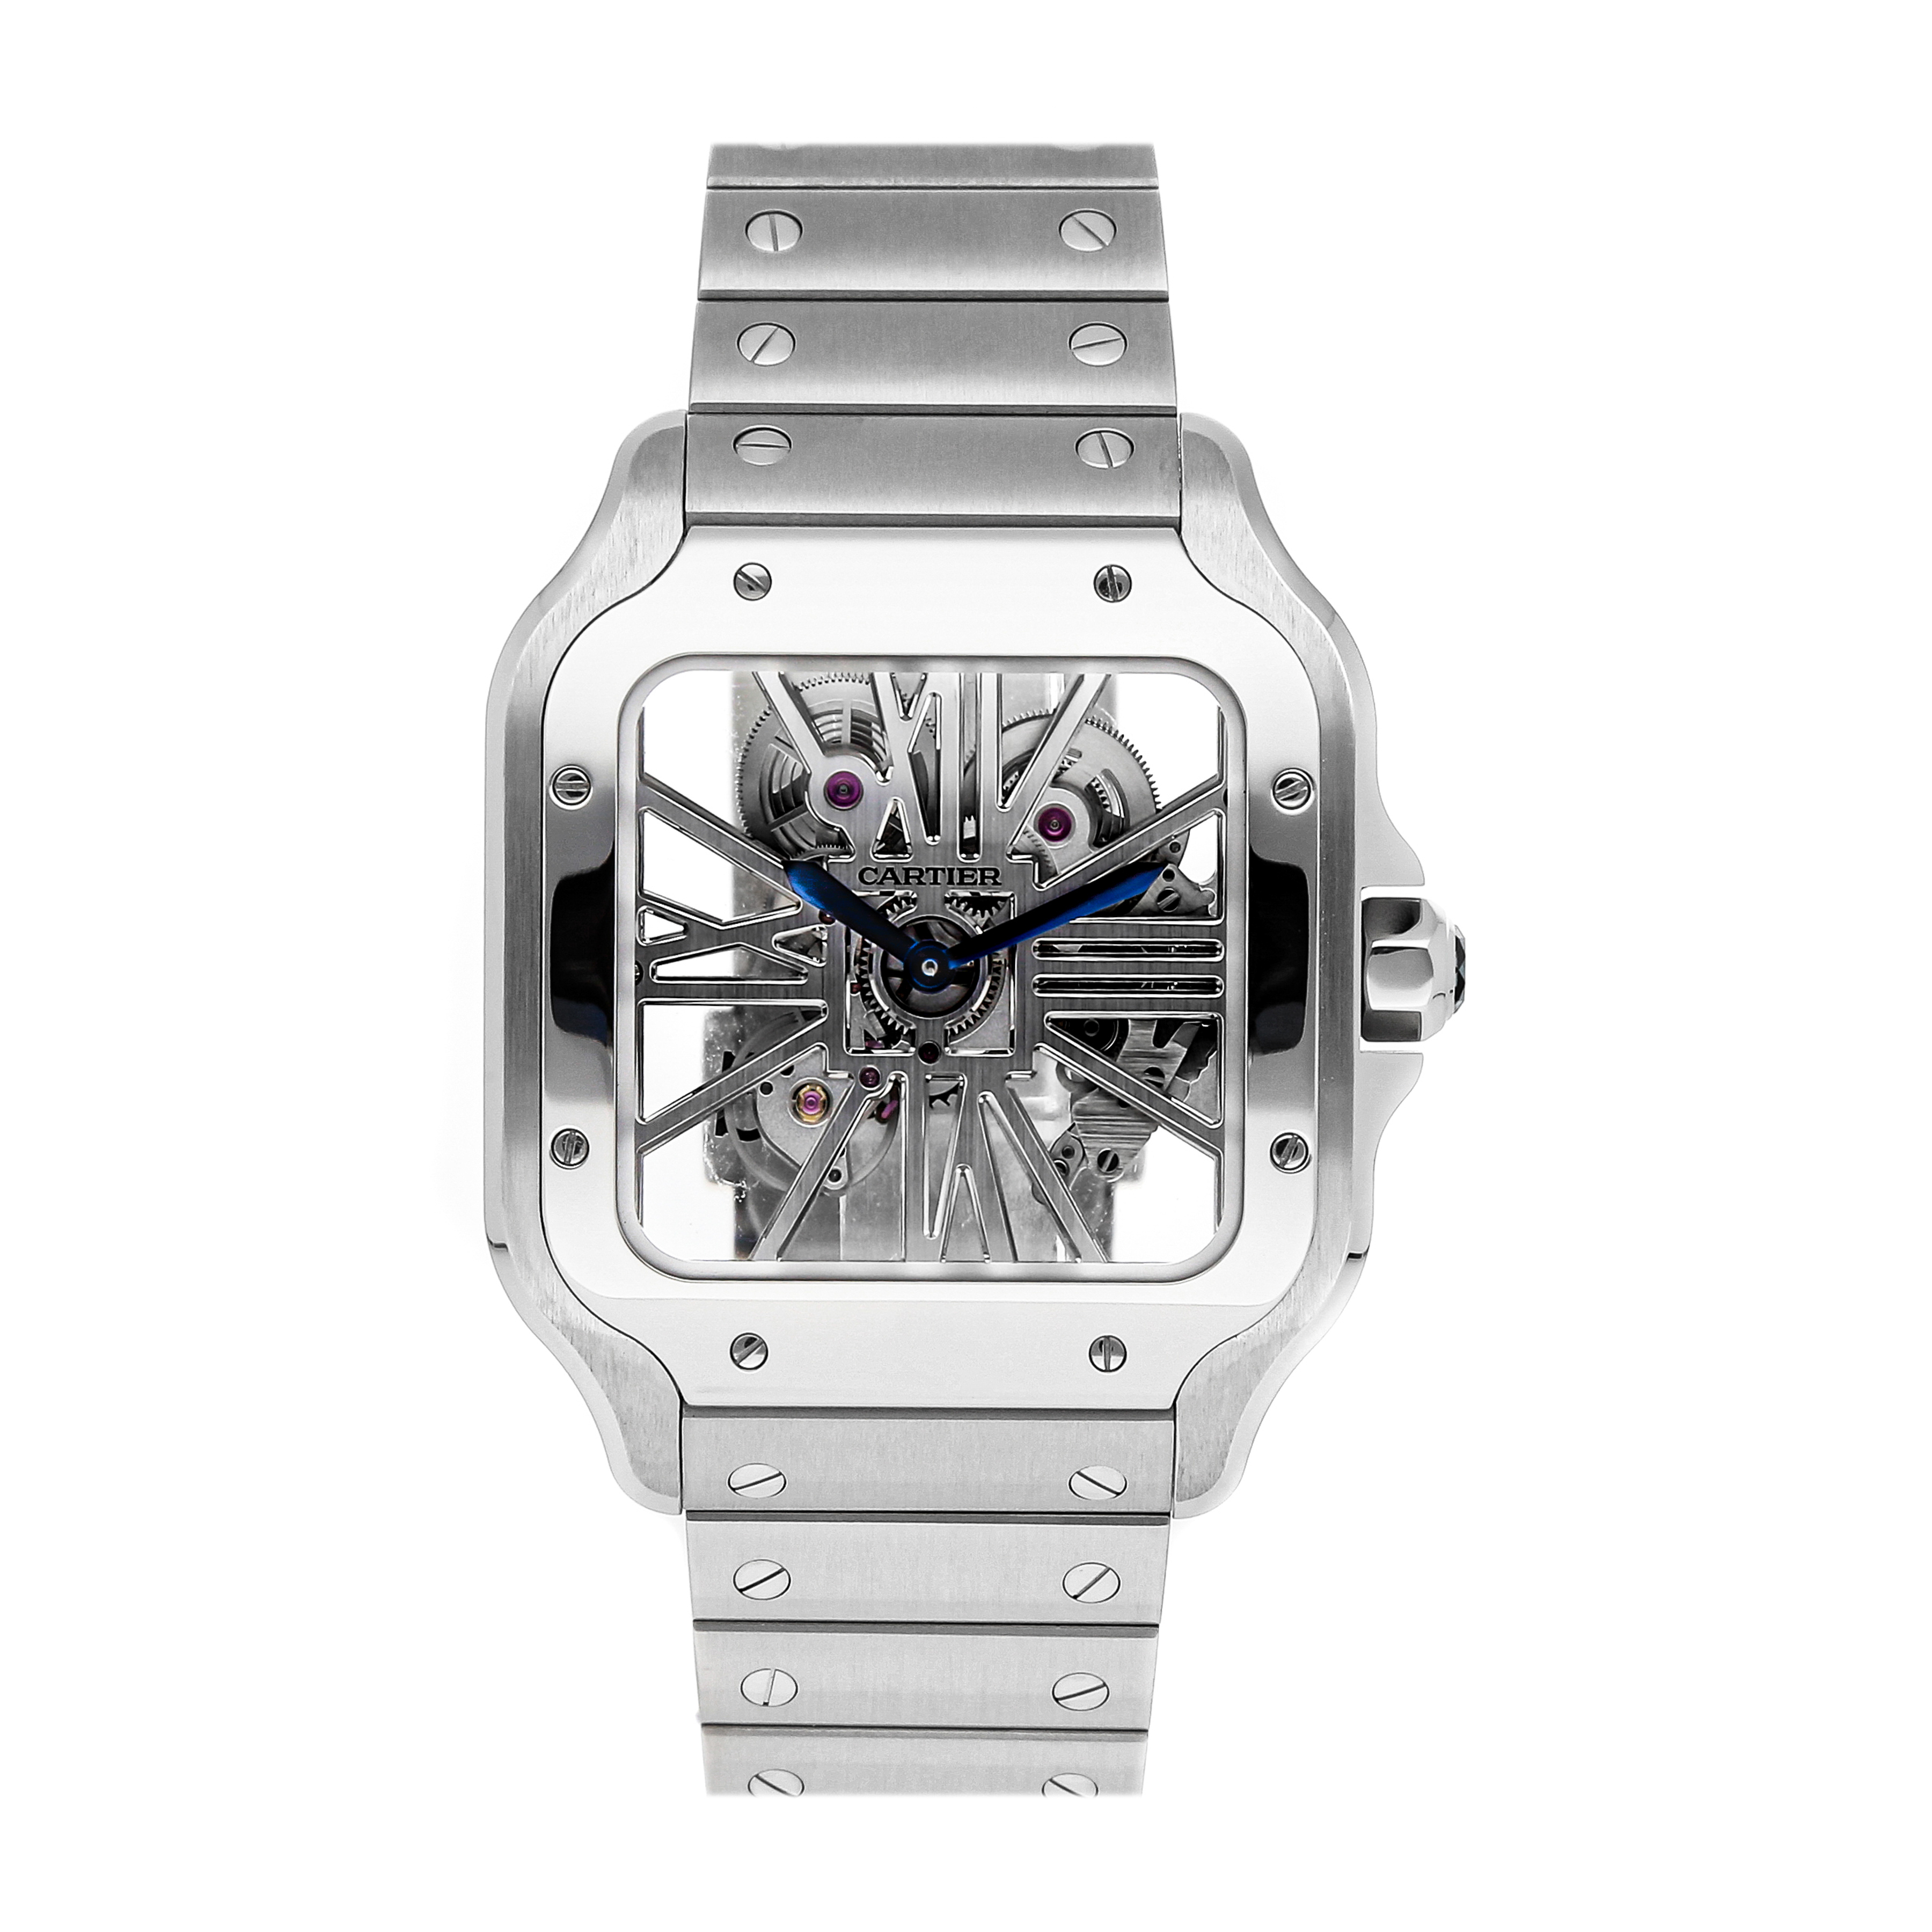 used cartier watches new york city